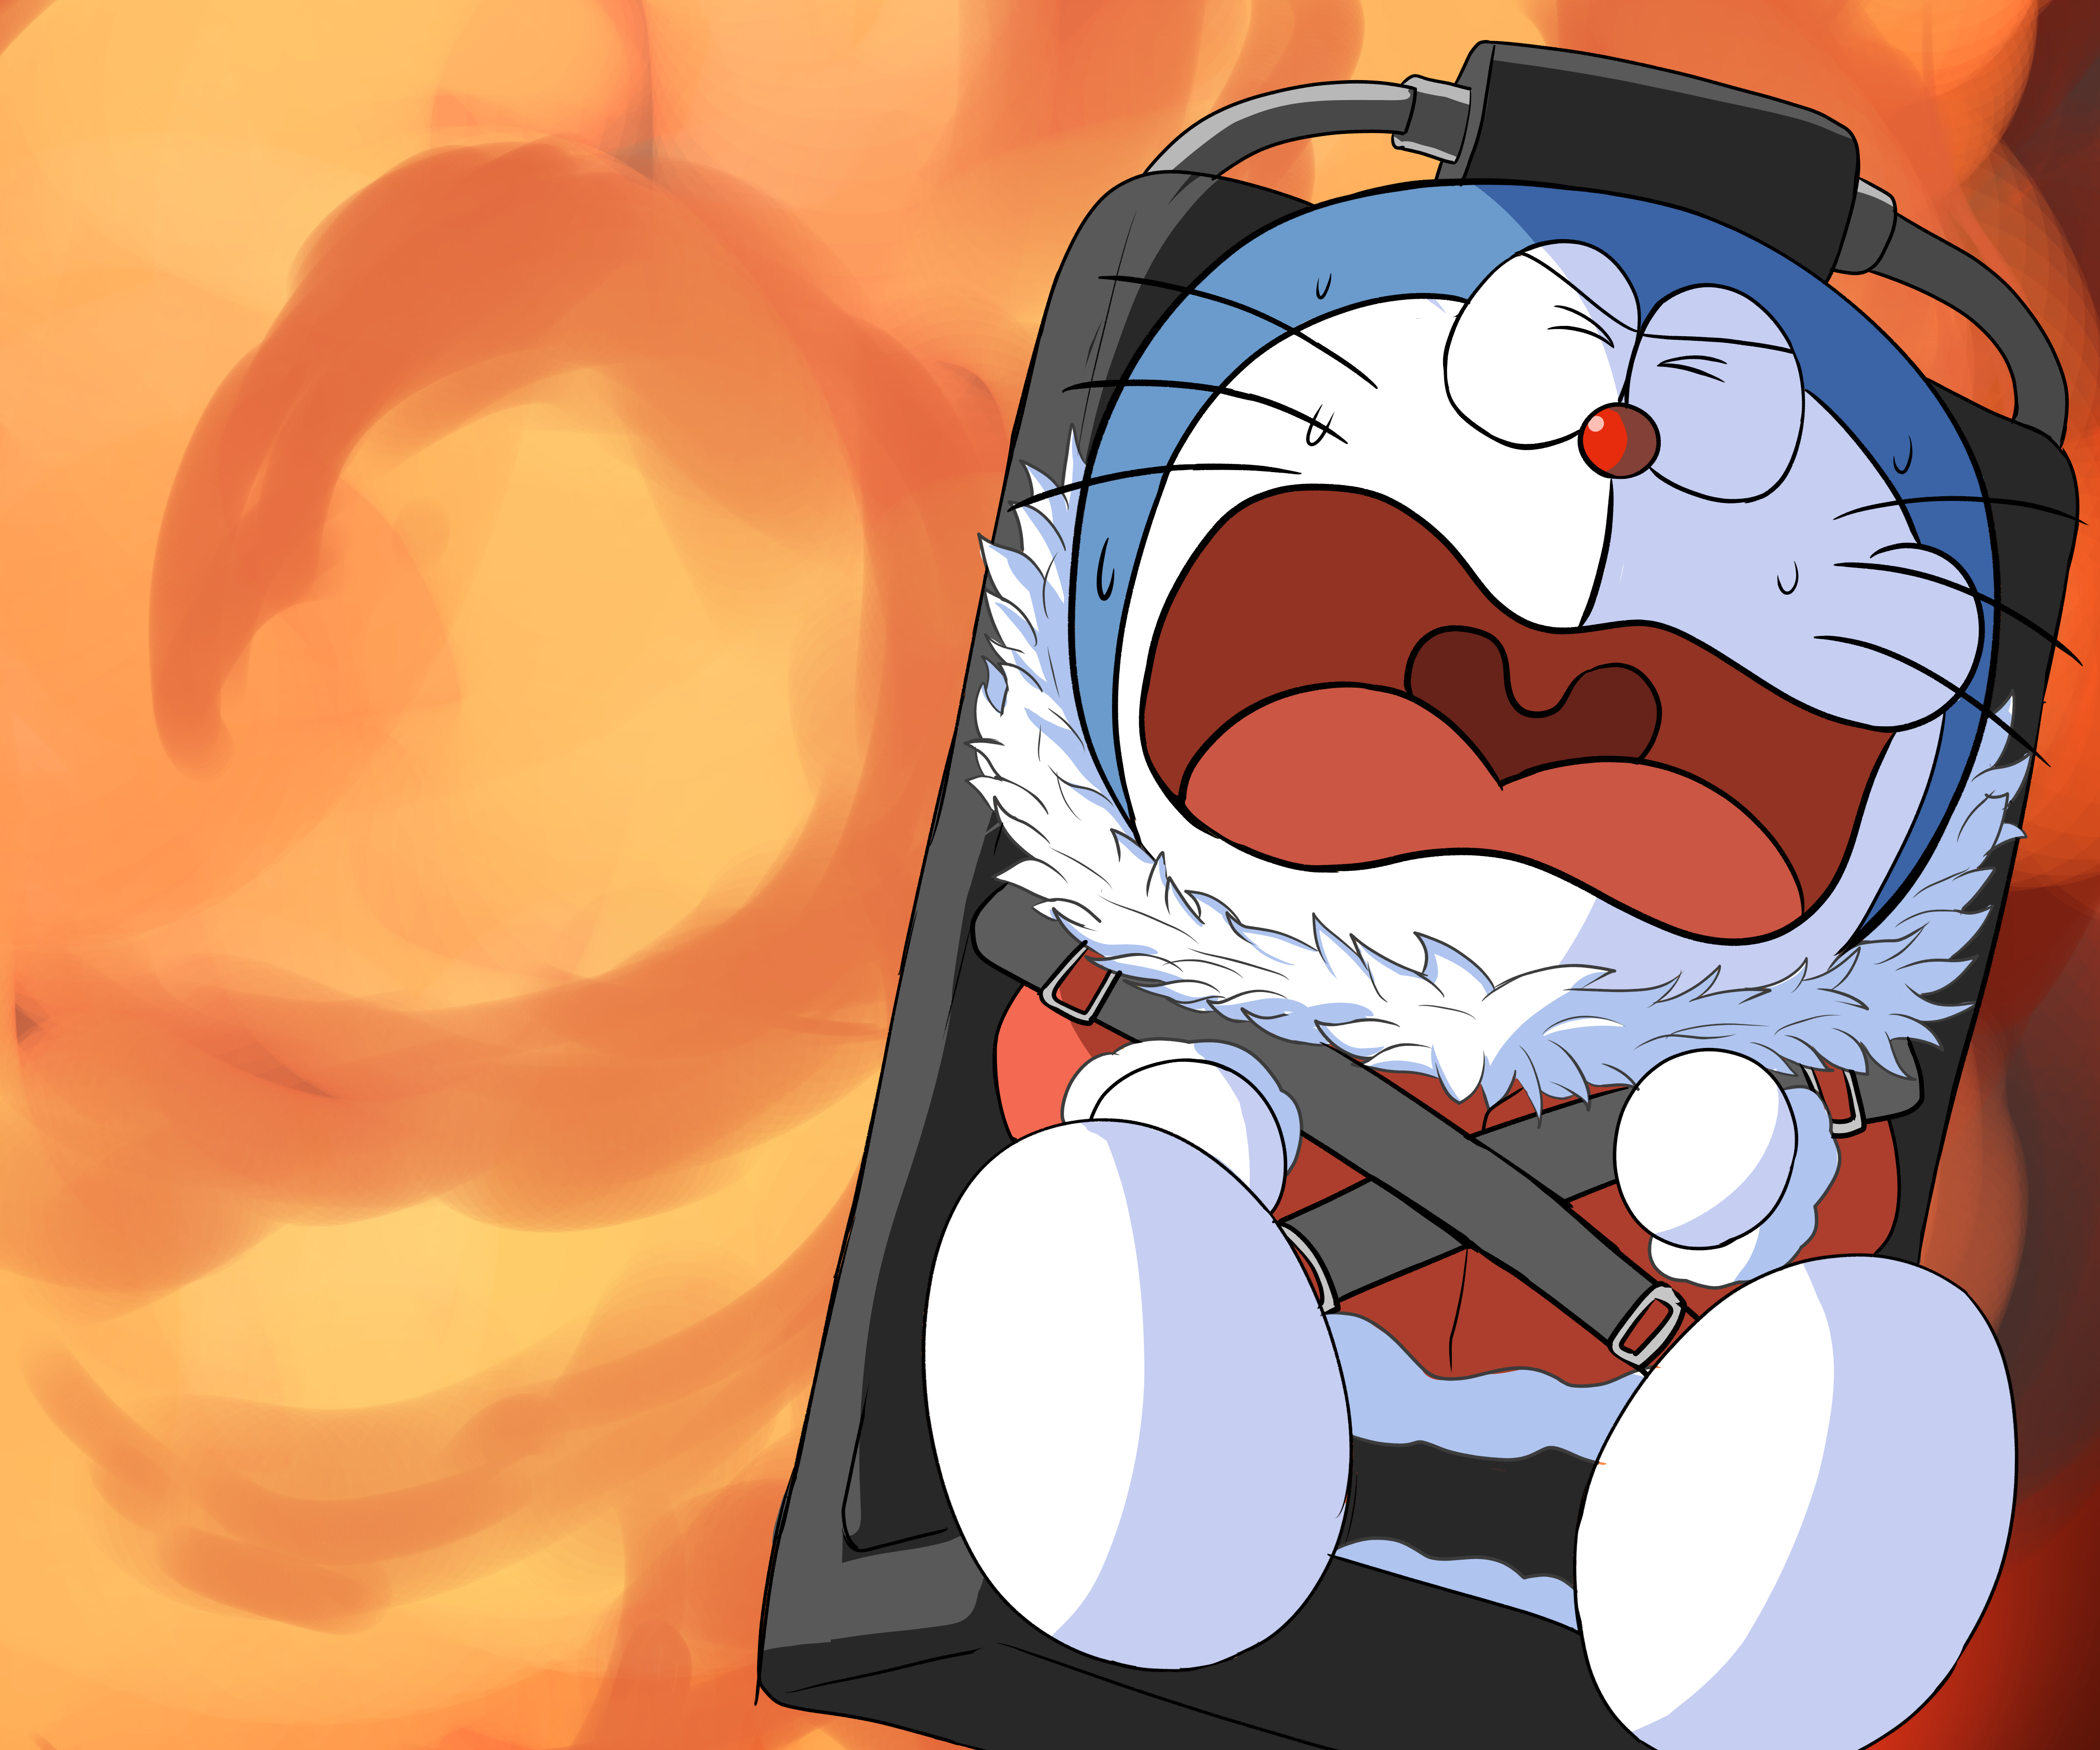 Download Doraemon wallpapers for mobile phone free Doraemon HD pictures